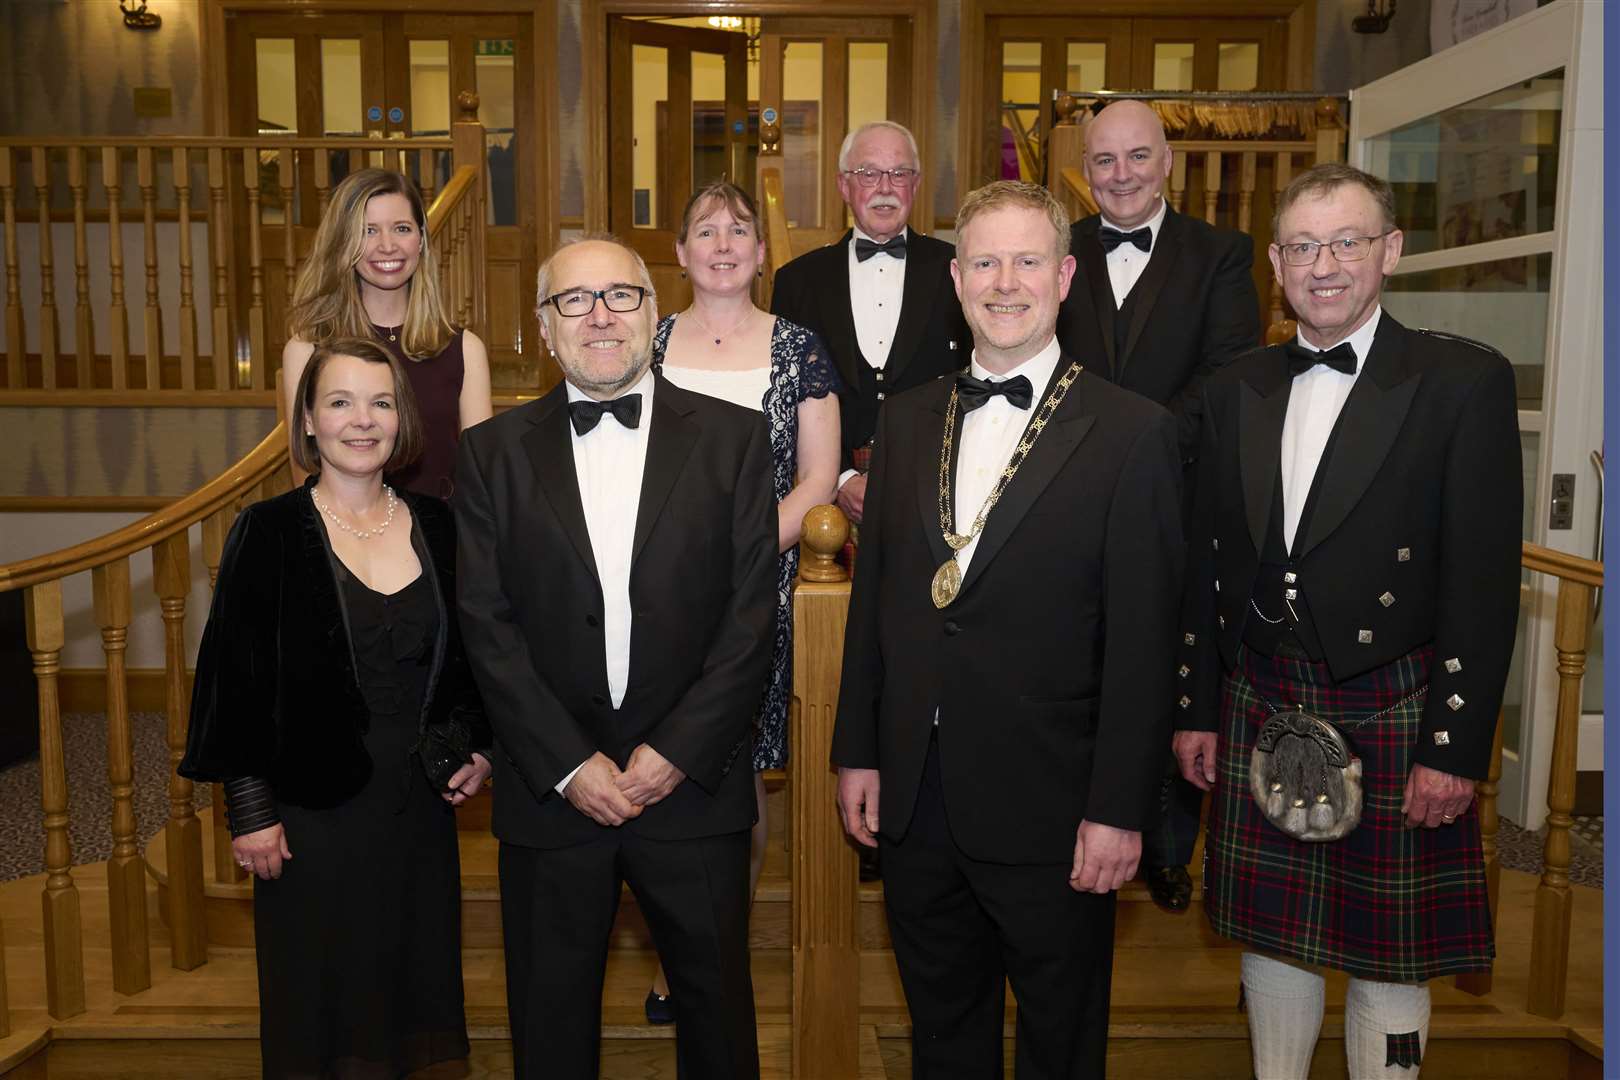 Top table (back row, from left): Rebecca Holt, Janis Wilby, Alistair Dodds and Liam Christie, and (front row, from left) Ailsa Andrews, Clive Coleman, Andrew Stott and Stewart Nicol.